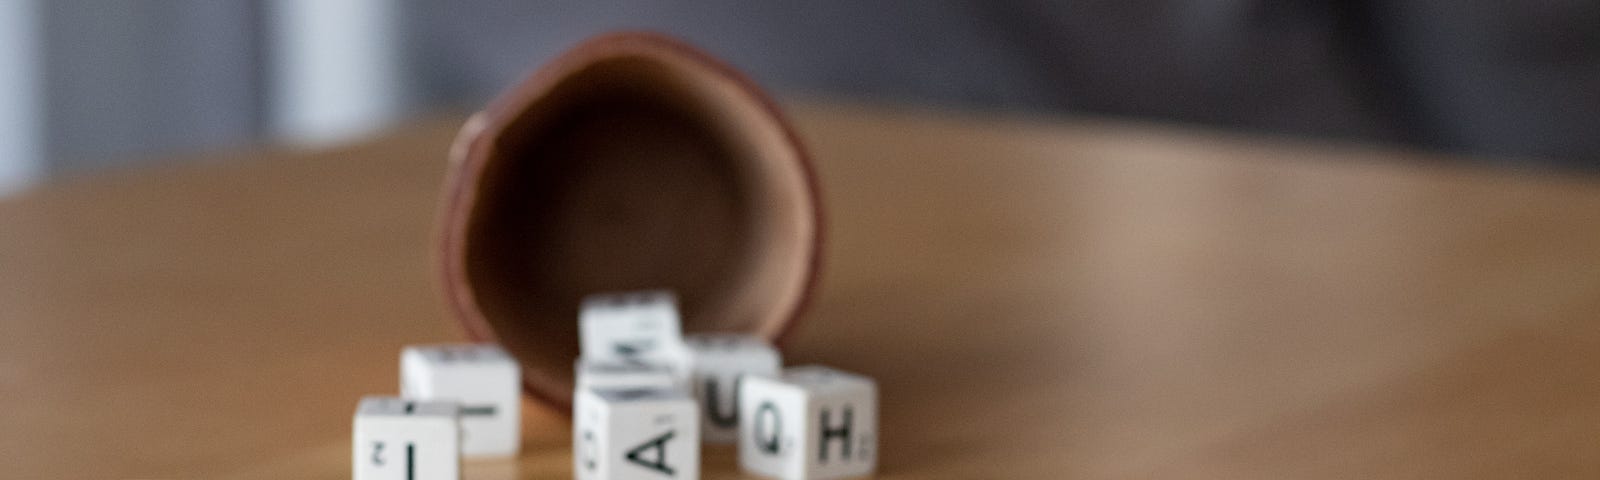 Scrabble pieces spill out of a small wooden cup, with six in the foreground spelling “DEMENZ.” Dementia is a general term for loss of memory, language, problem-solving, and other thinking abilities that are severe enough to interfere with daily life. Alzheimer’s is the most common dementia cause.